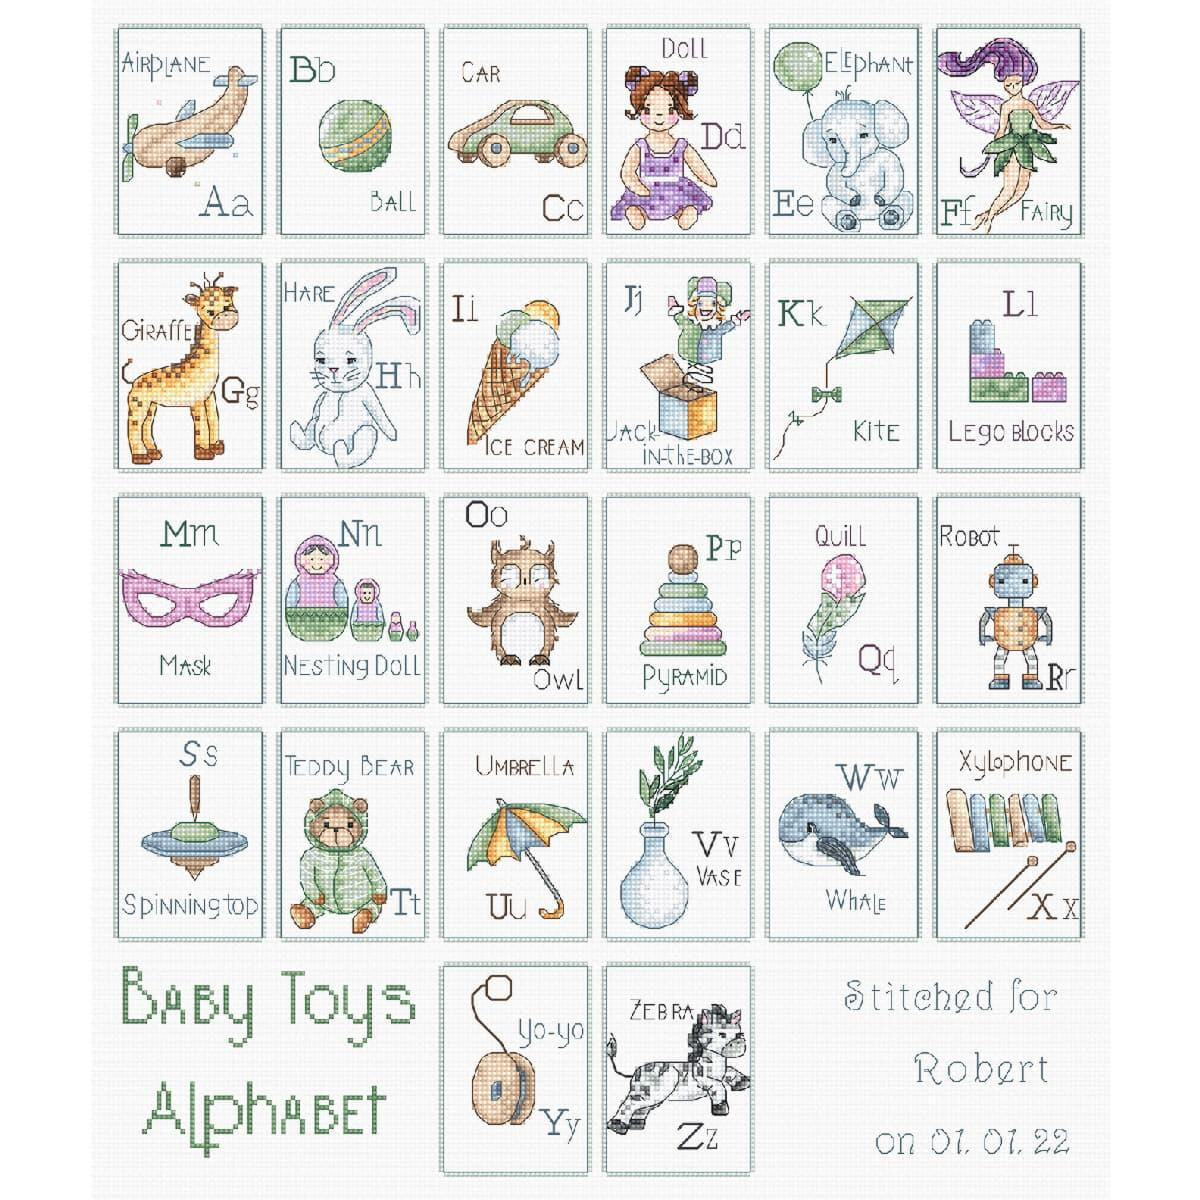 A grid of alphabet blocks shows baby toys, with each...